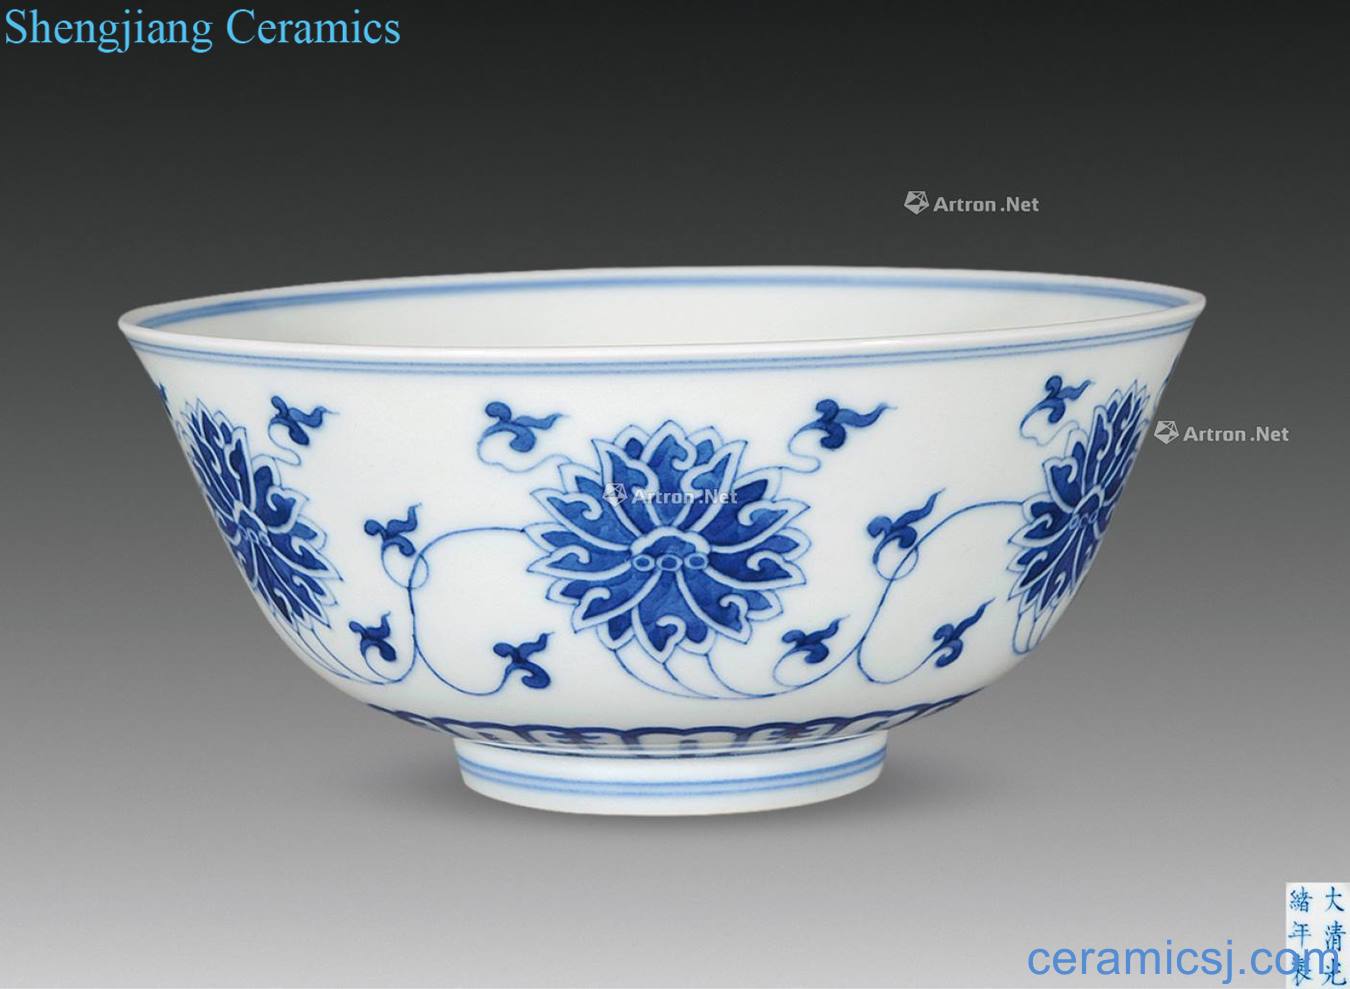 Qing guangxu Passion fruit bowl of blue and white tie up branches